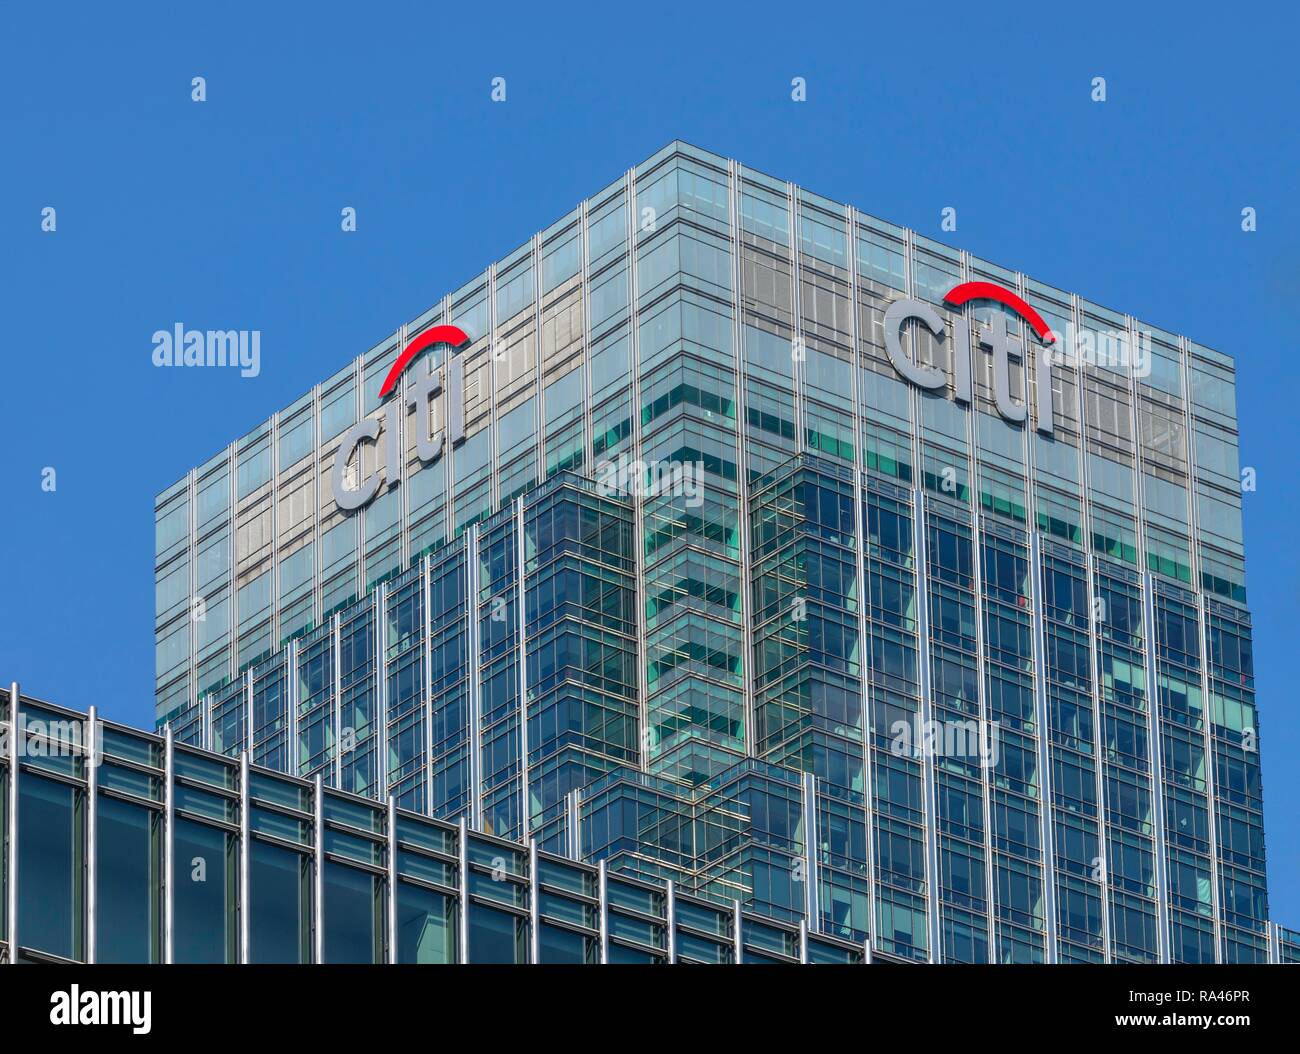 Citi Bank headquarters at Citigroup Centre, financial and banking district Canary Wharf, London, United Kingdom Stock Photo